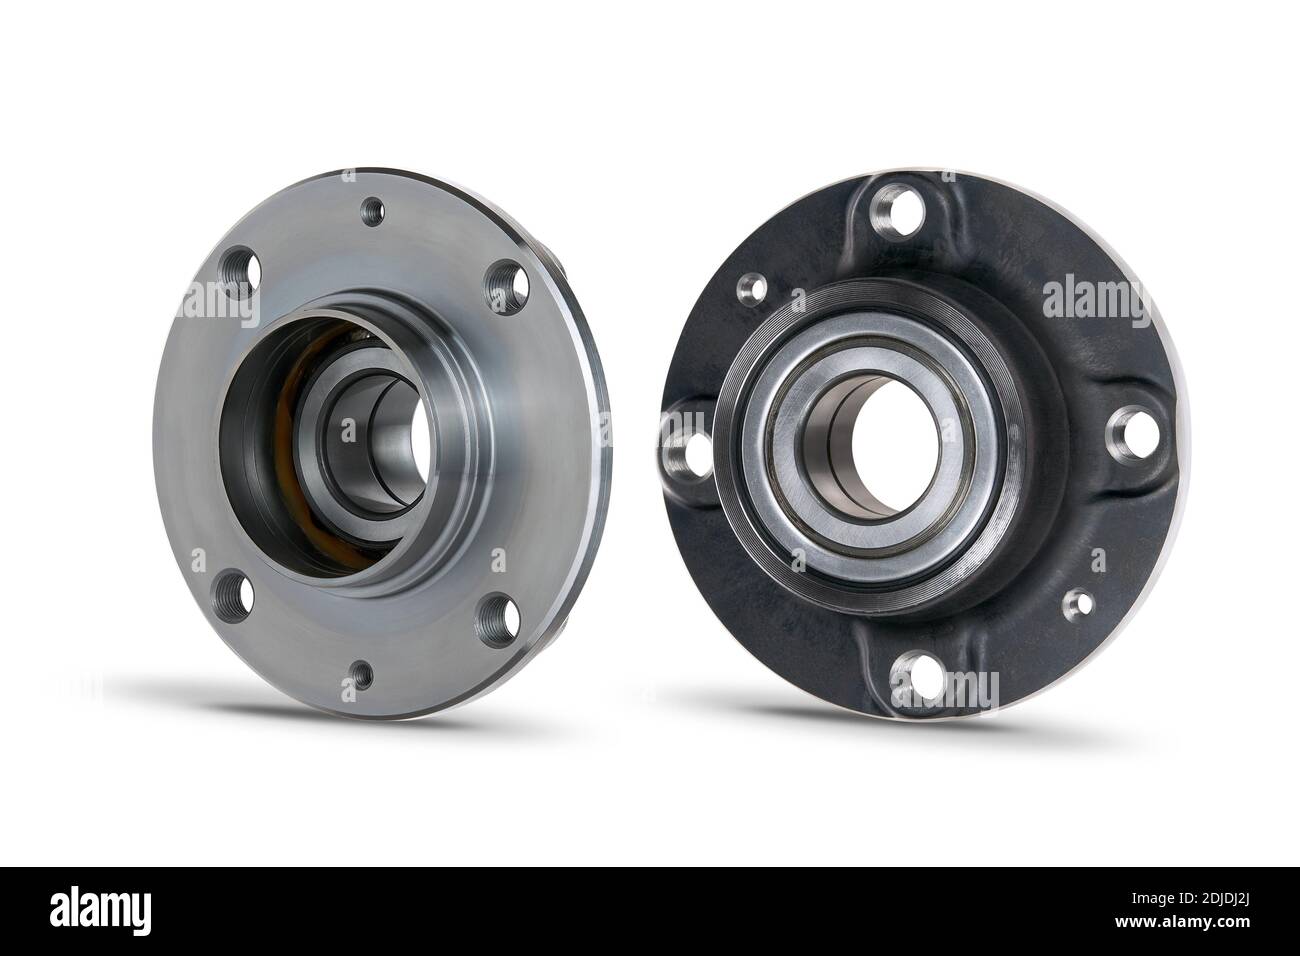 Isolate. Auto parts. Two wheel bearings close-up on a white background. Front and back views. For advertising, catalogs, educational materials. Stock Photo